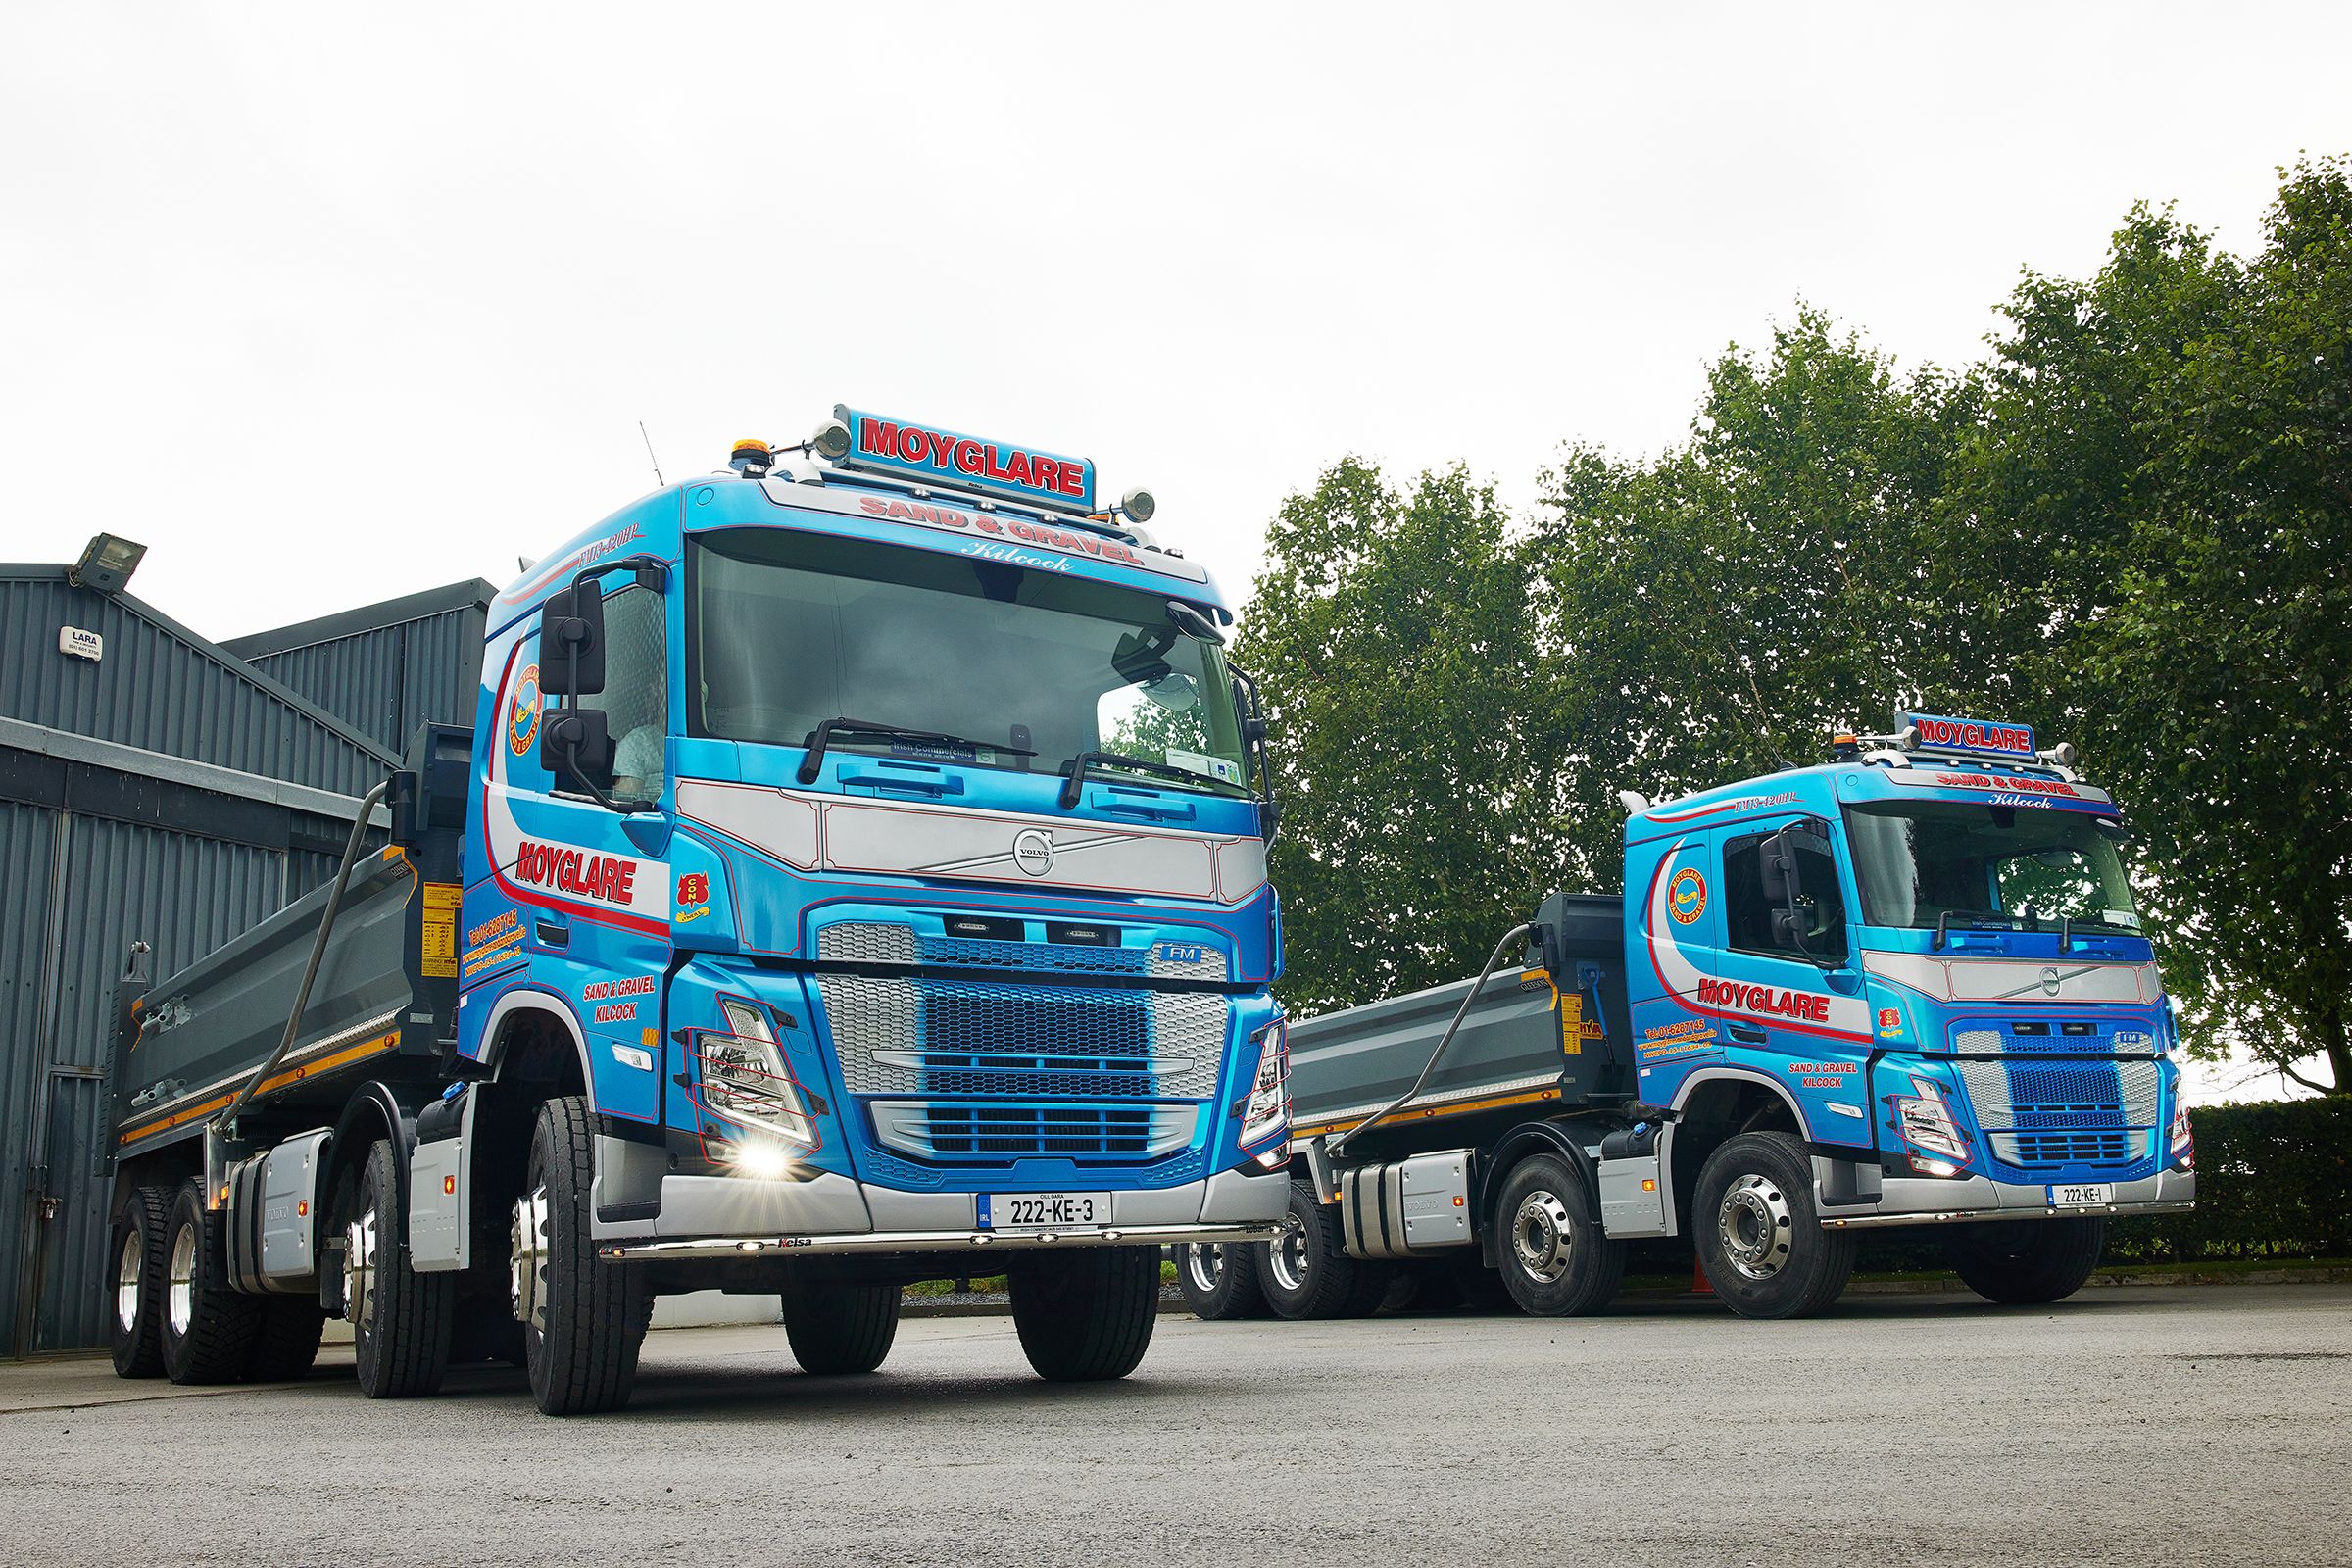 Two more Volvo FM tippers deliver the goods for Moyglare Sand & Gravel